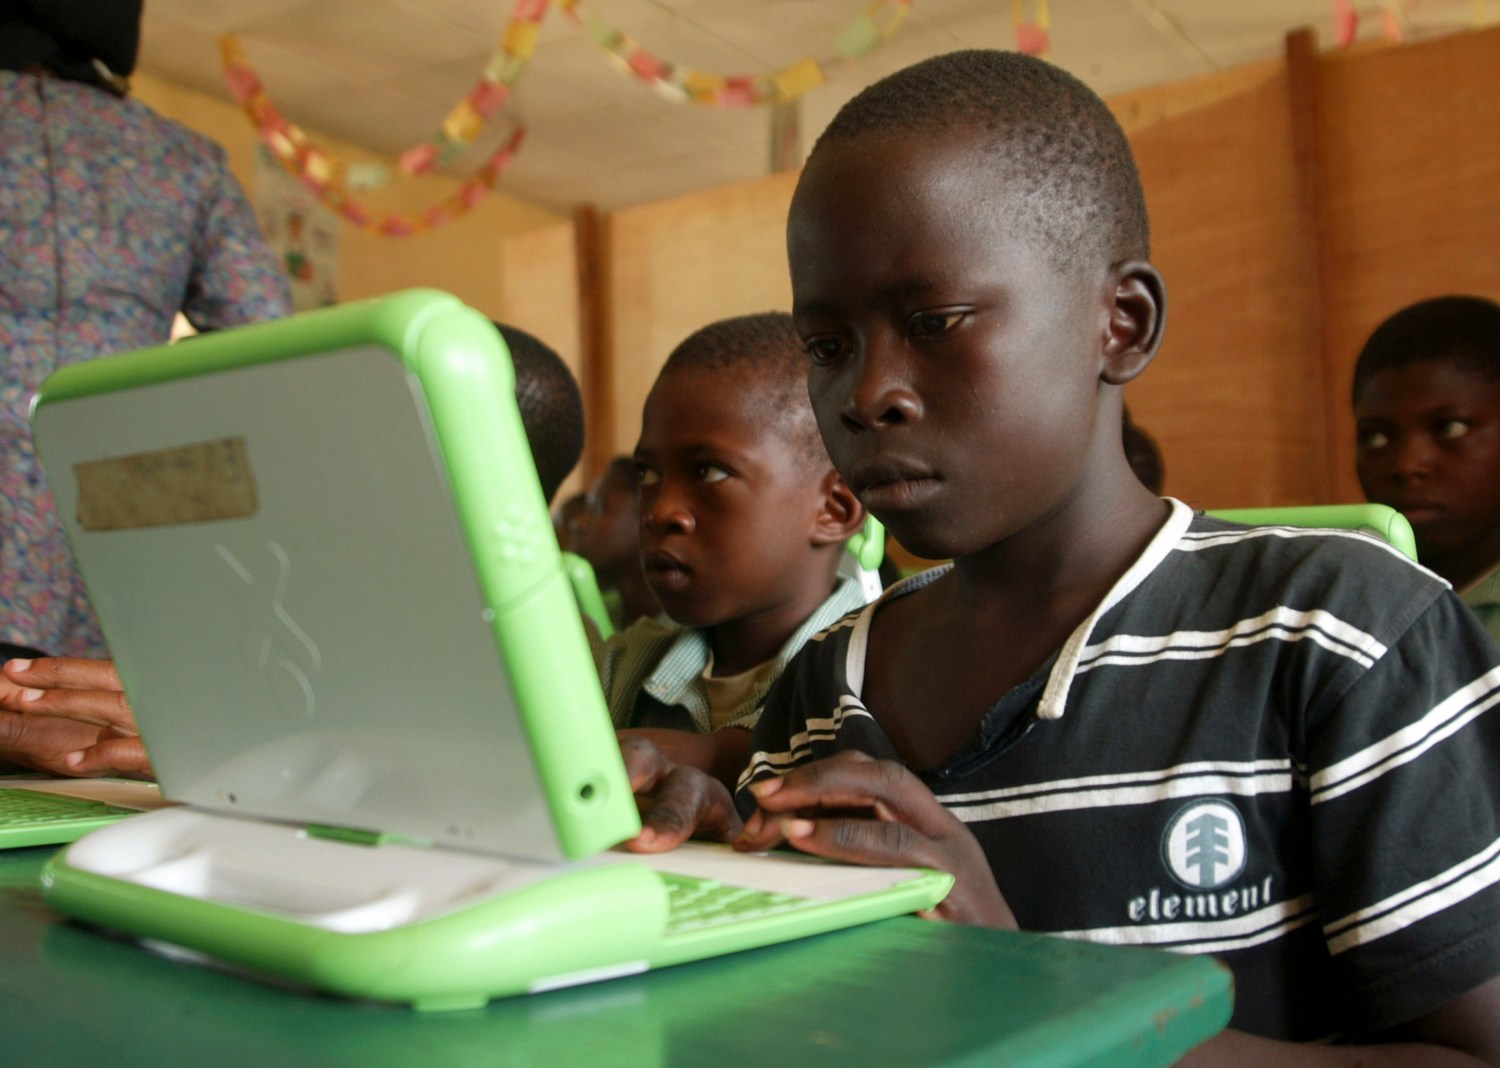 Nigerian pupils work on computers at the LEA primary school in Abuja in this May 30, 2007 picture. The school is a pilot site for the "One laptop per child" project, a non profit organisation aimed at providing children in the world with a means to express their potential. Reuters/Afolabi Sotunde (NIGERIA)